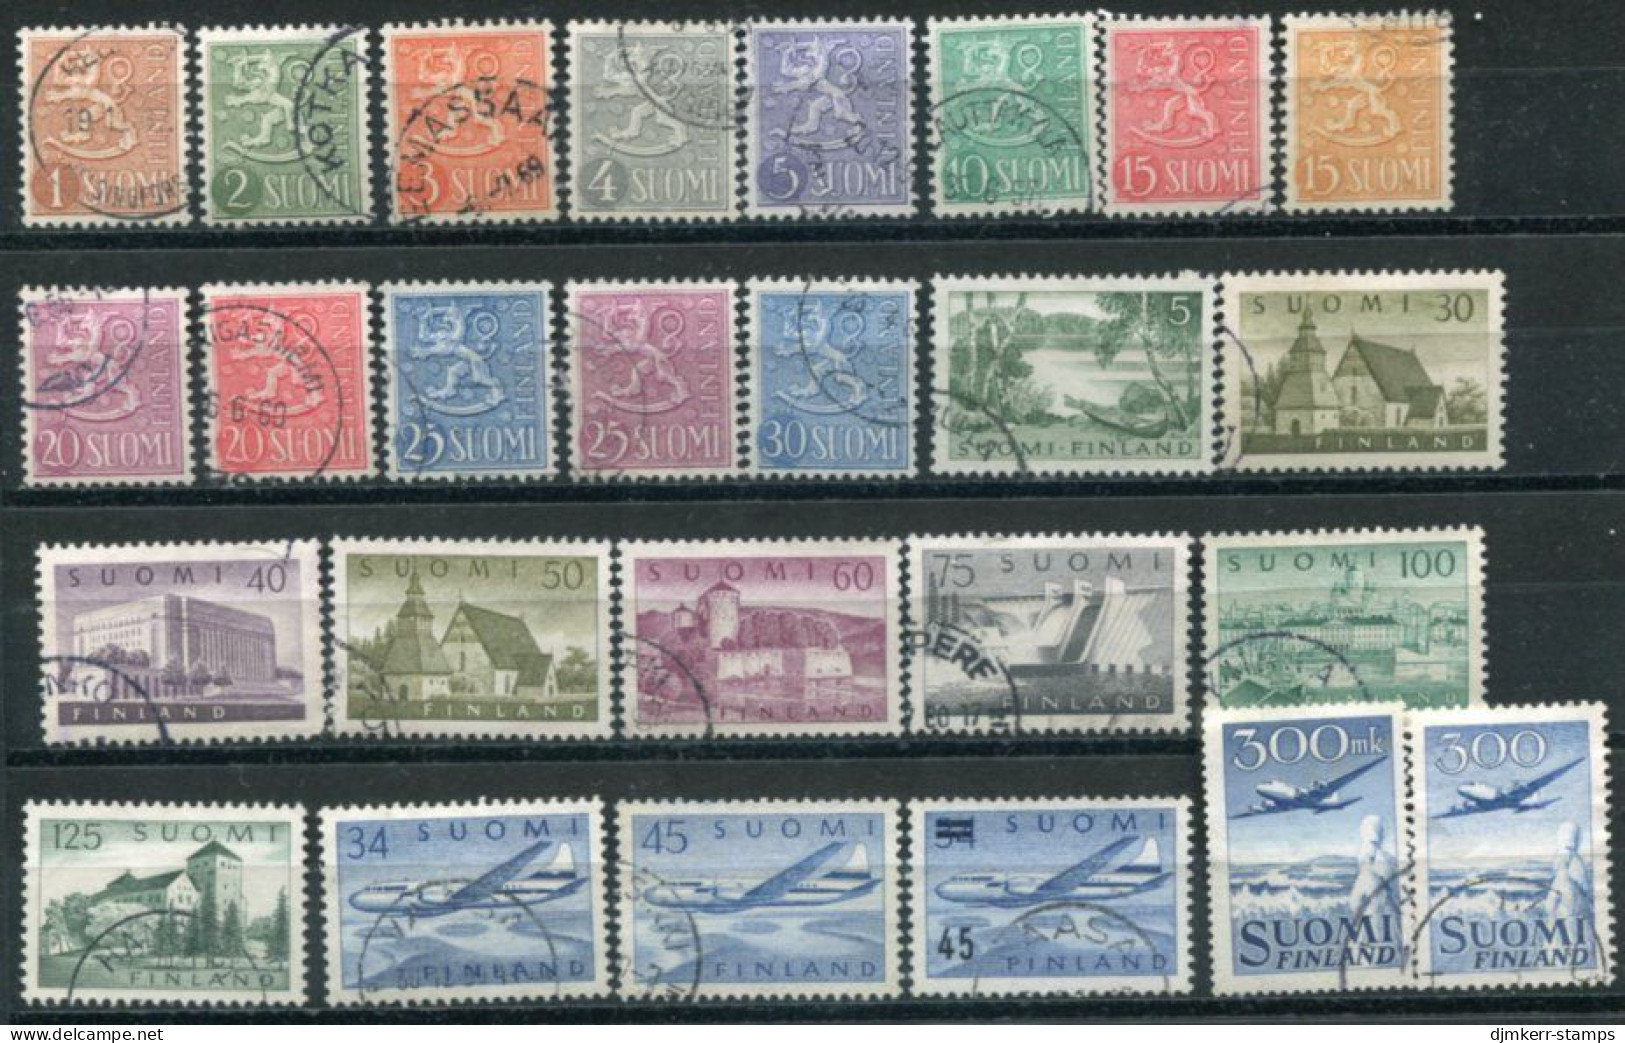 FINLAND 1950-1961 Definitives Complete Used. - Used Stamps